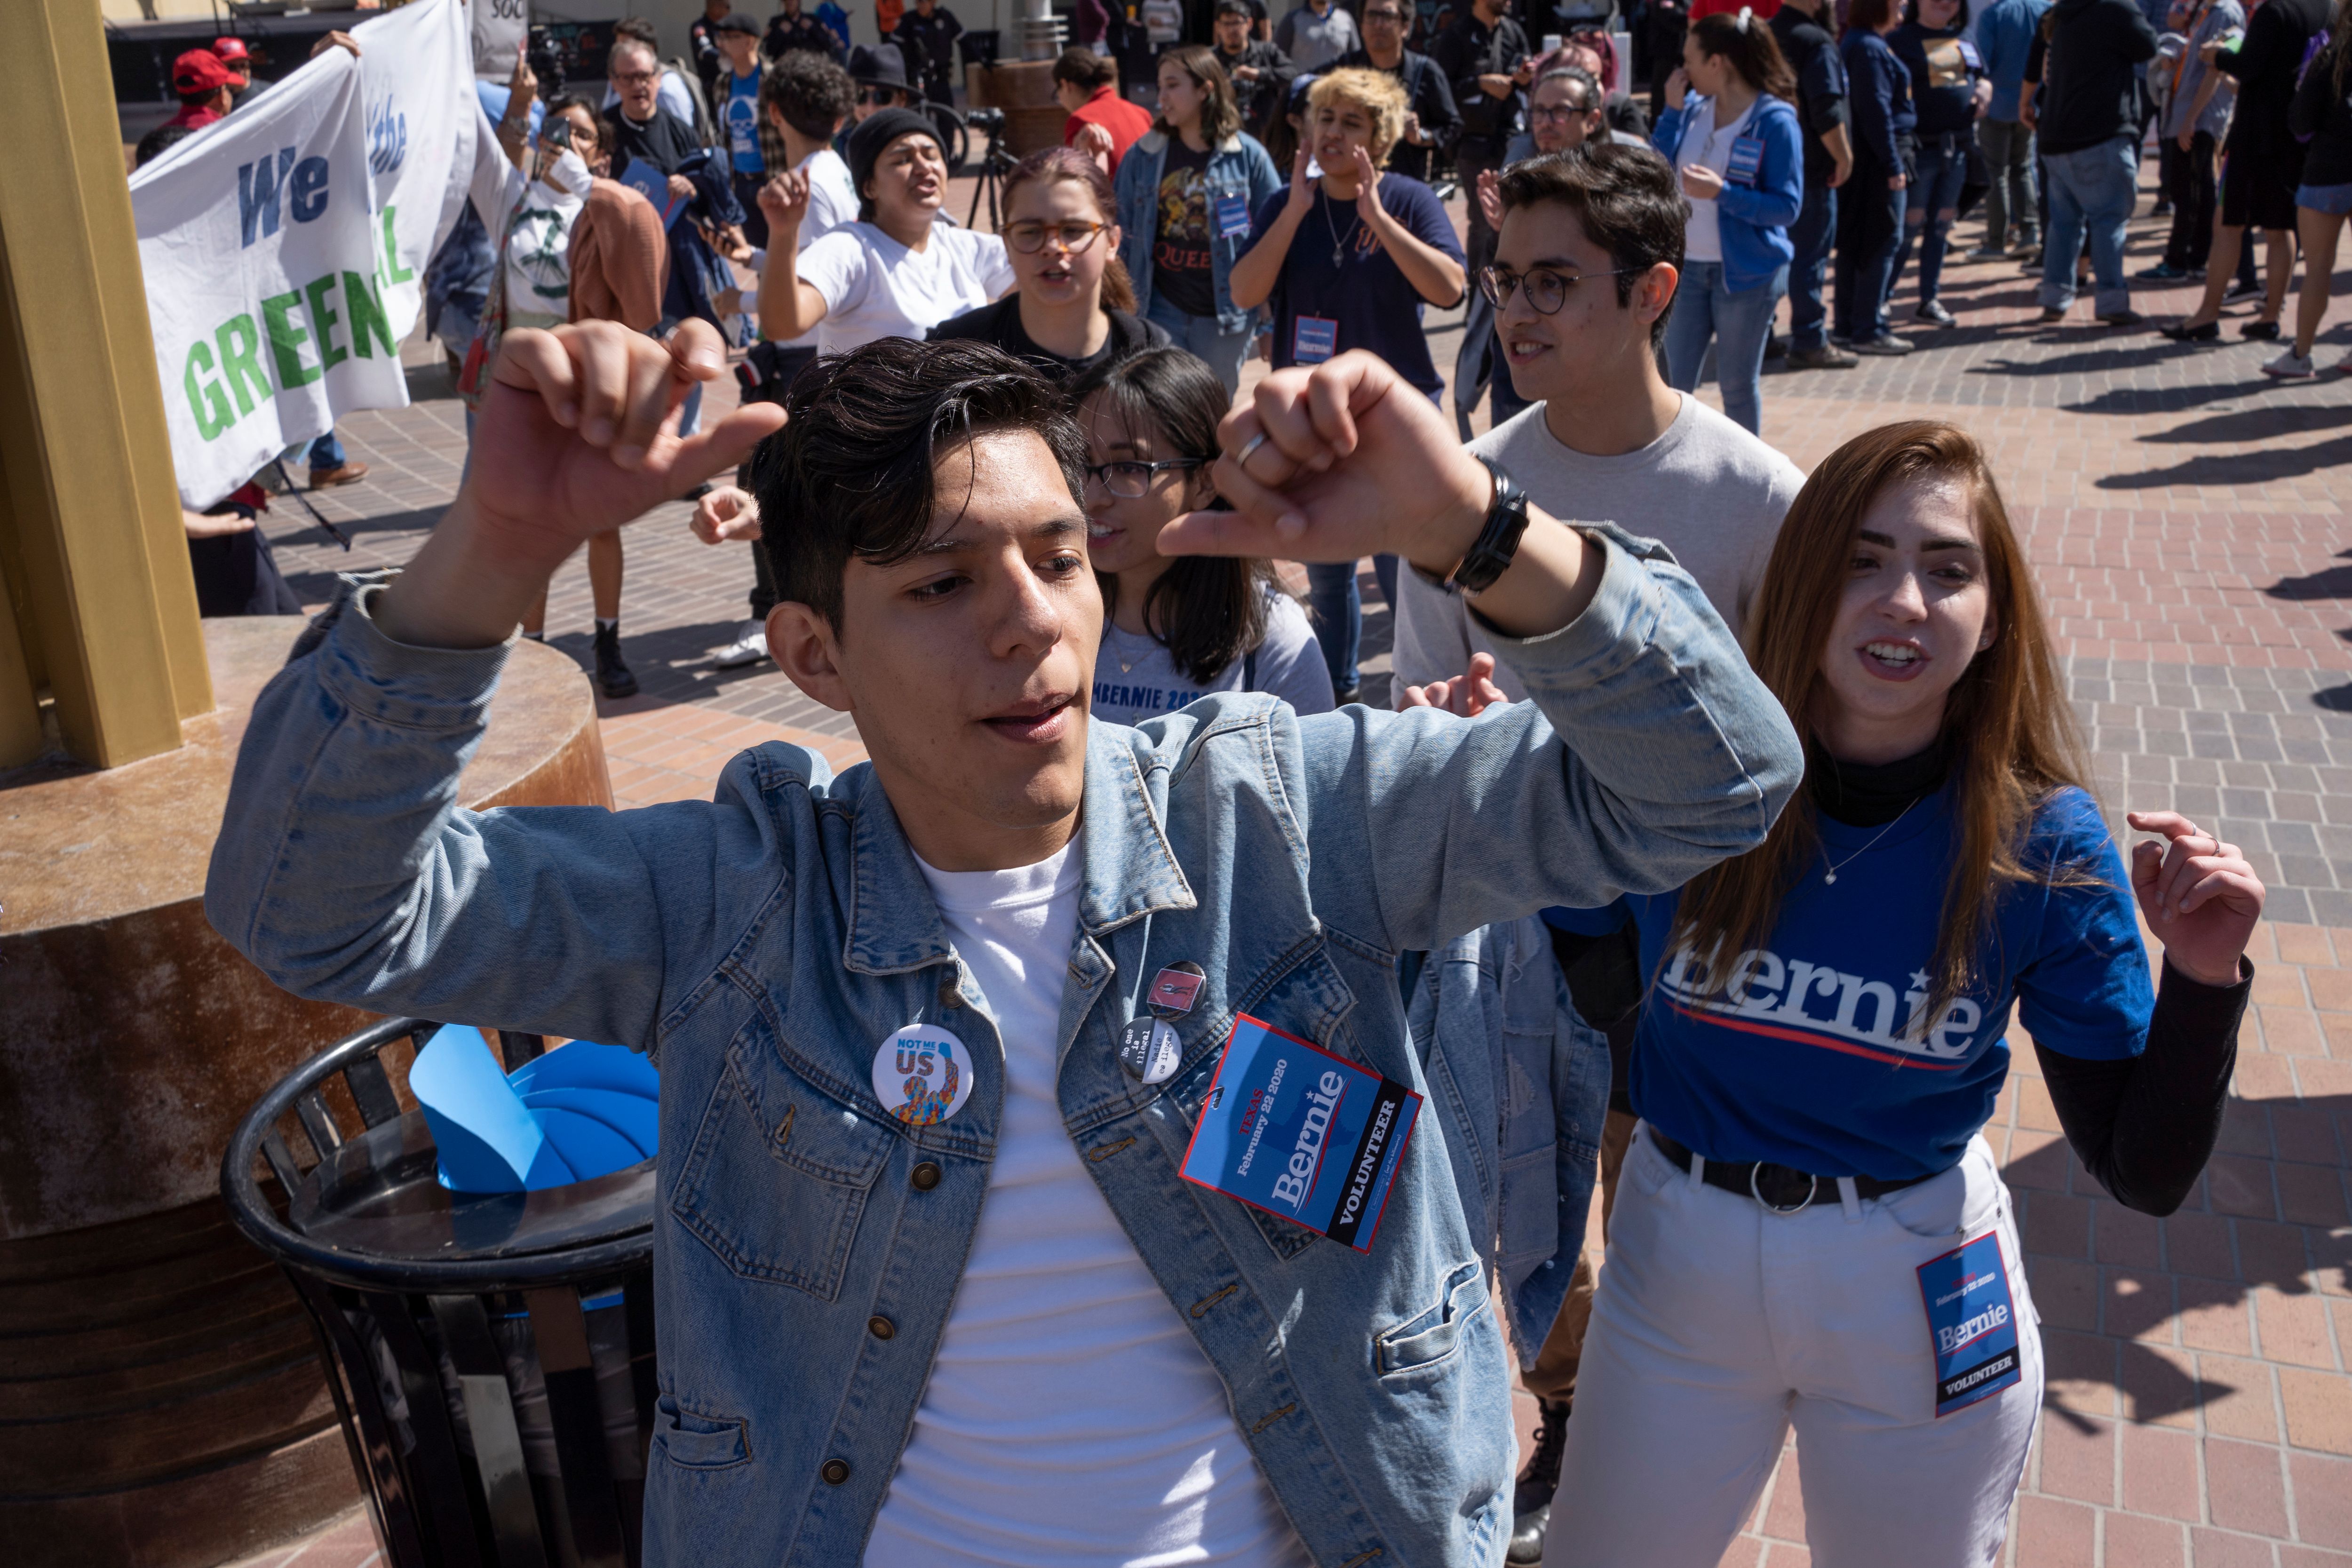 A young Latino man dances with his arms above his head in a blue jean jacket bearing a Bernie Sanders badge; a predominately young, Latino crowd dances in the sunshine behind him.